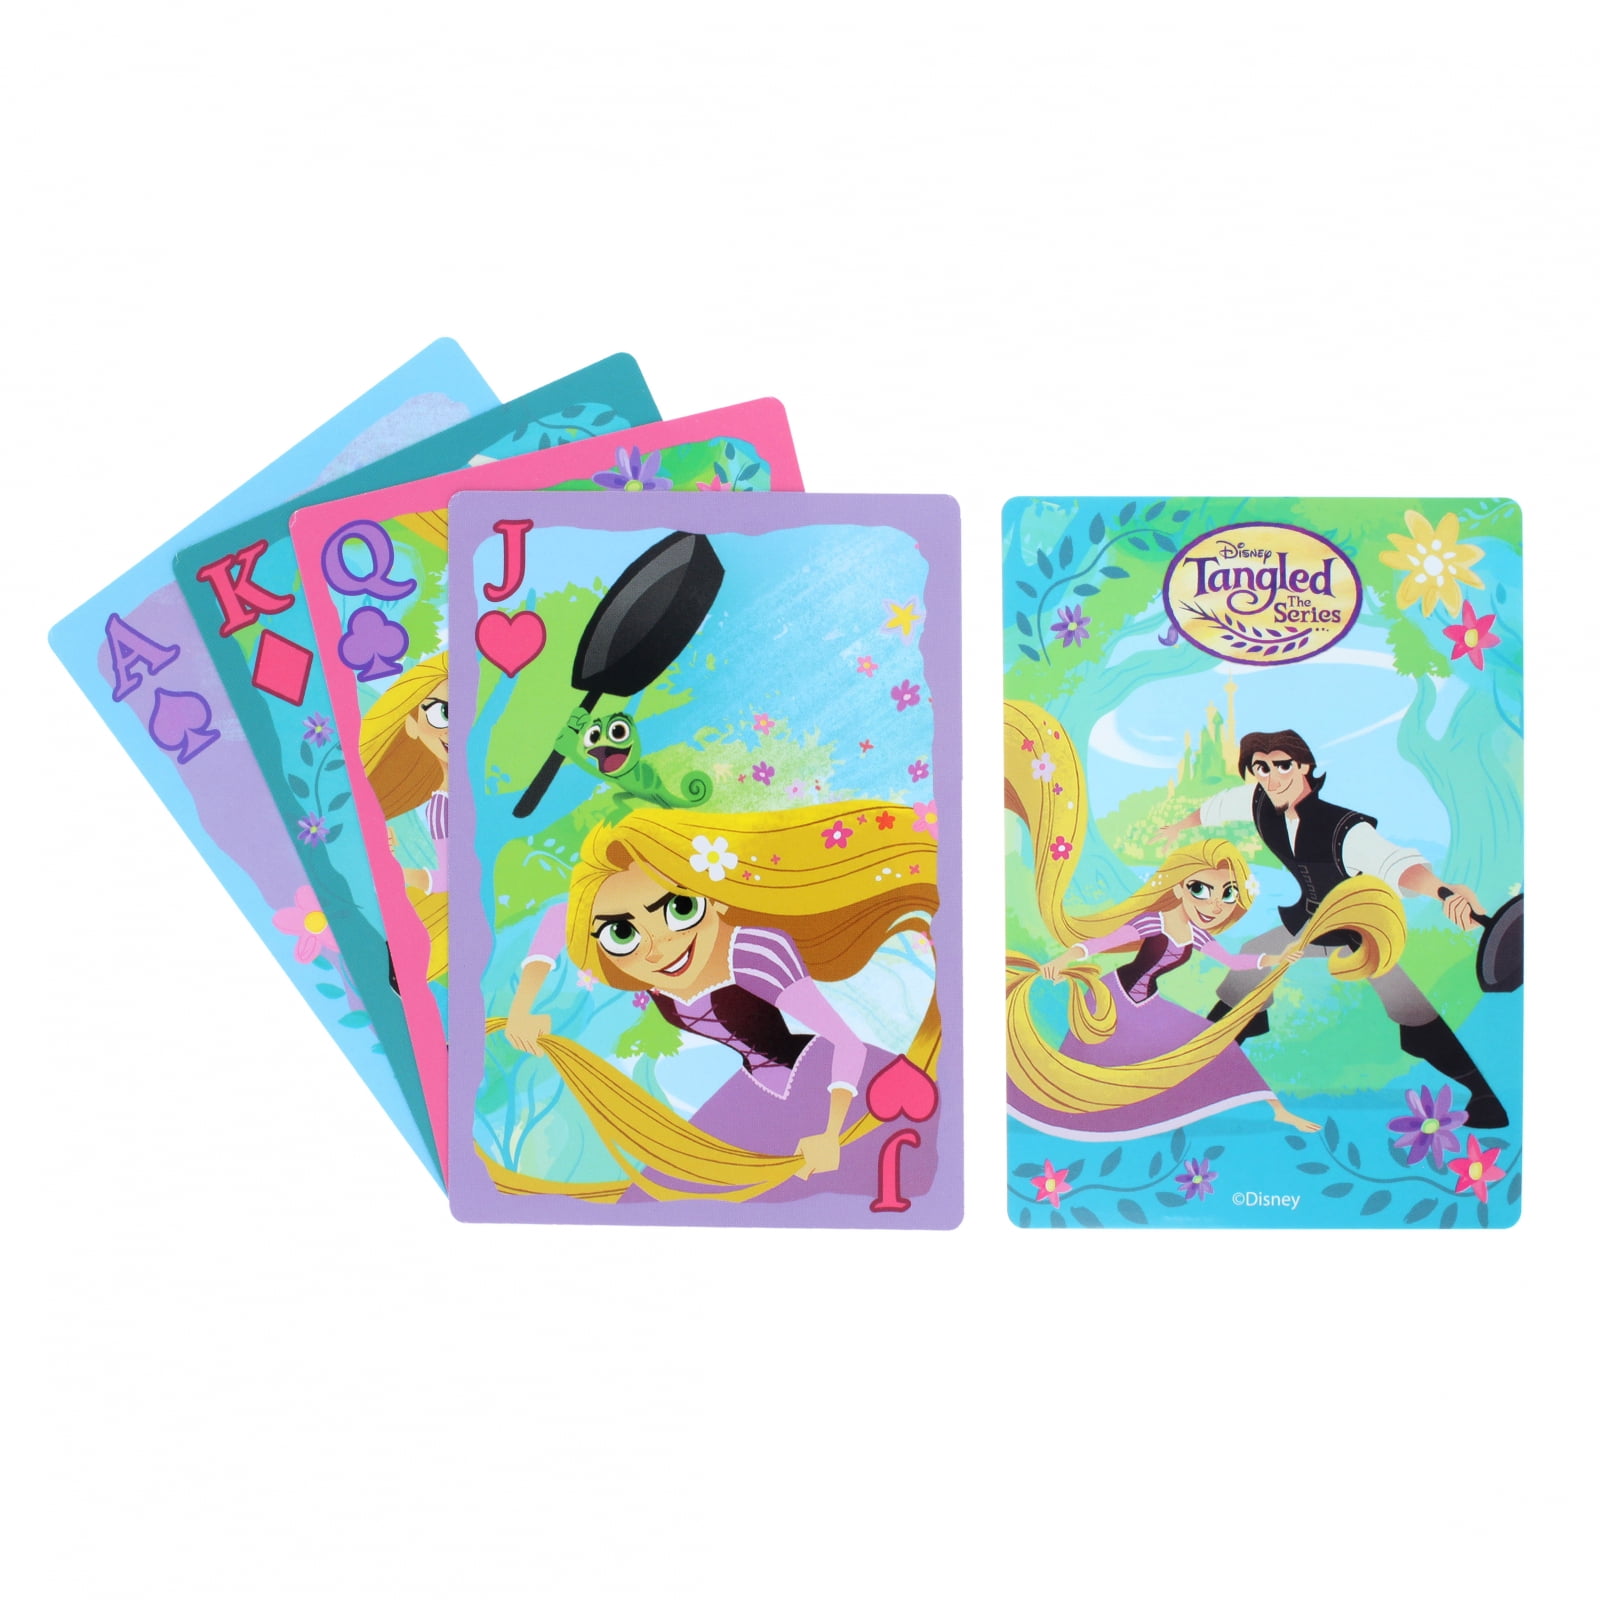 Details about   Nickelodeon Paw Patrol Jumbo Playing Cards Ages 4+ 